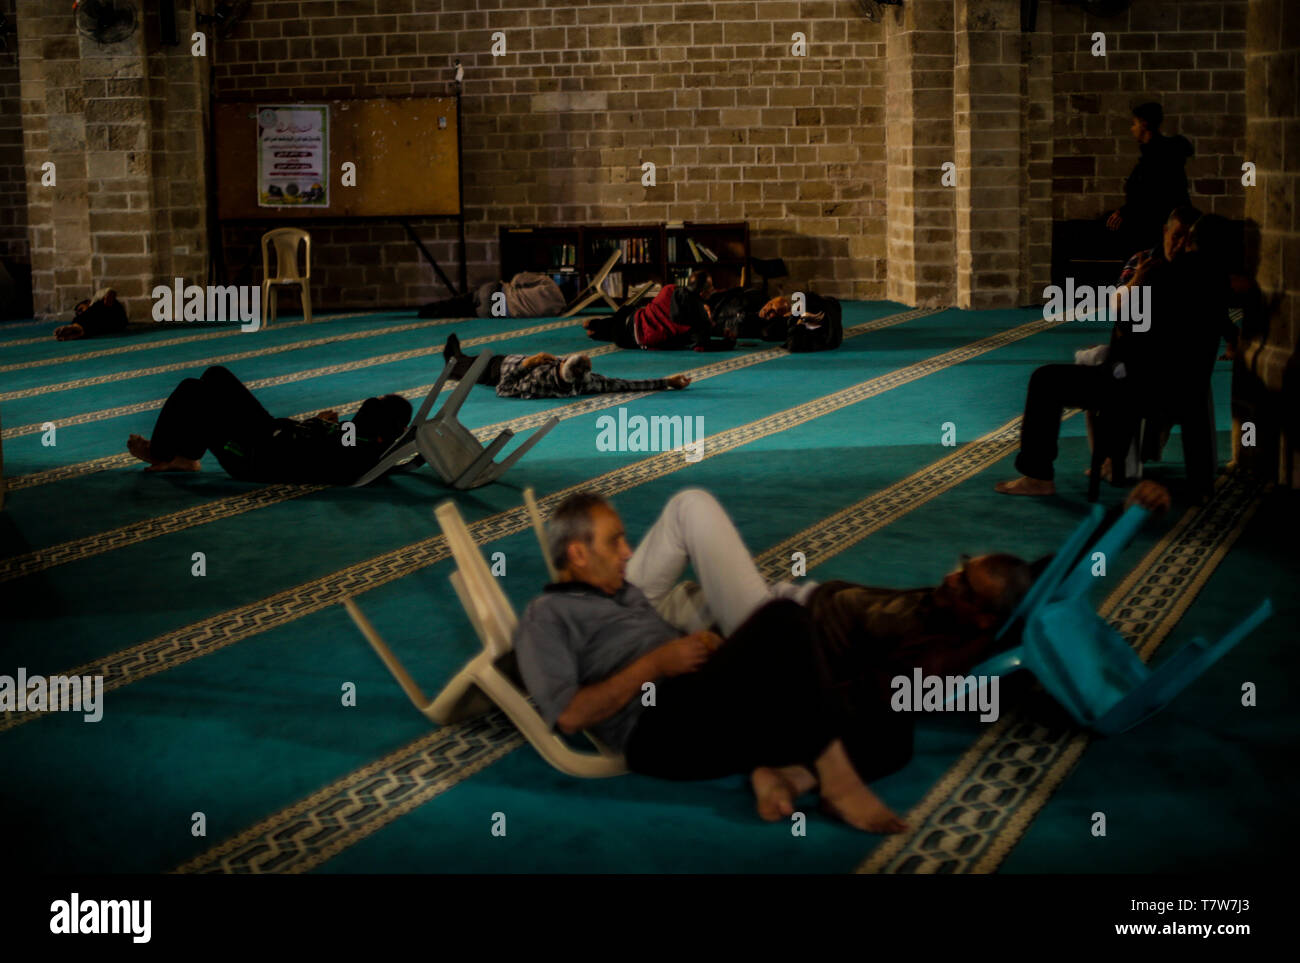 Palestinians seen relaxing at the al-Omari mosque during Ramadan. Third day of Ramadan. Muslims throughout the world are participating in the holy fasting month of Ramadan, the holiest month in Islamic calendar, refraining from eating, drinking and smoking from dawn to dusk. Stock Photo